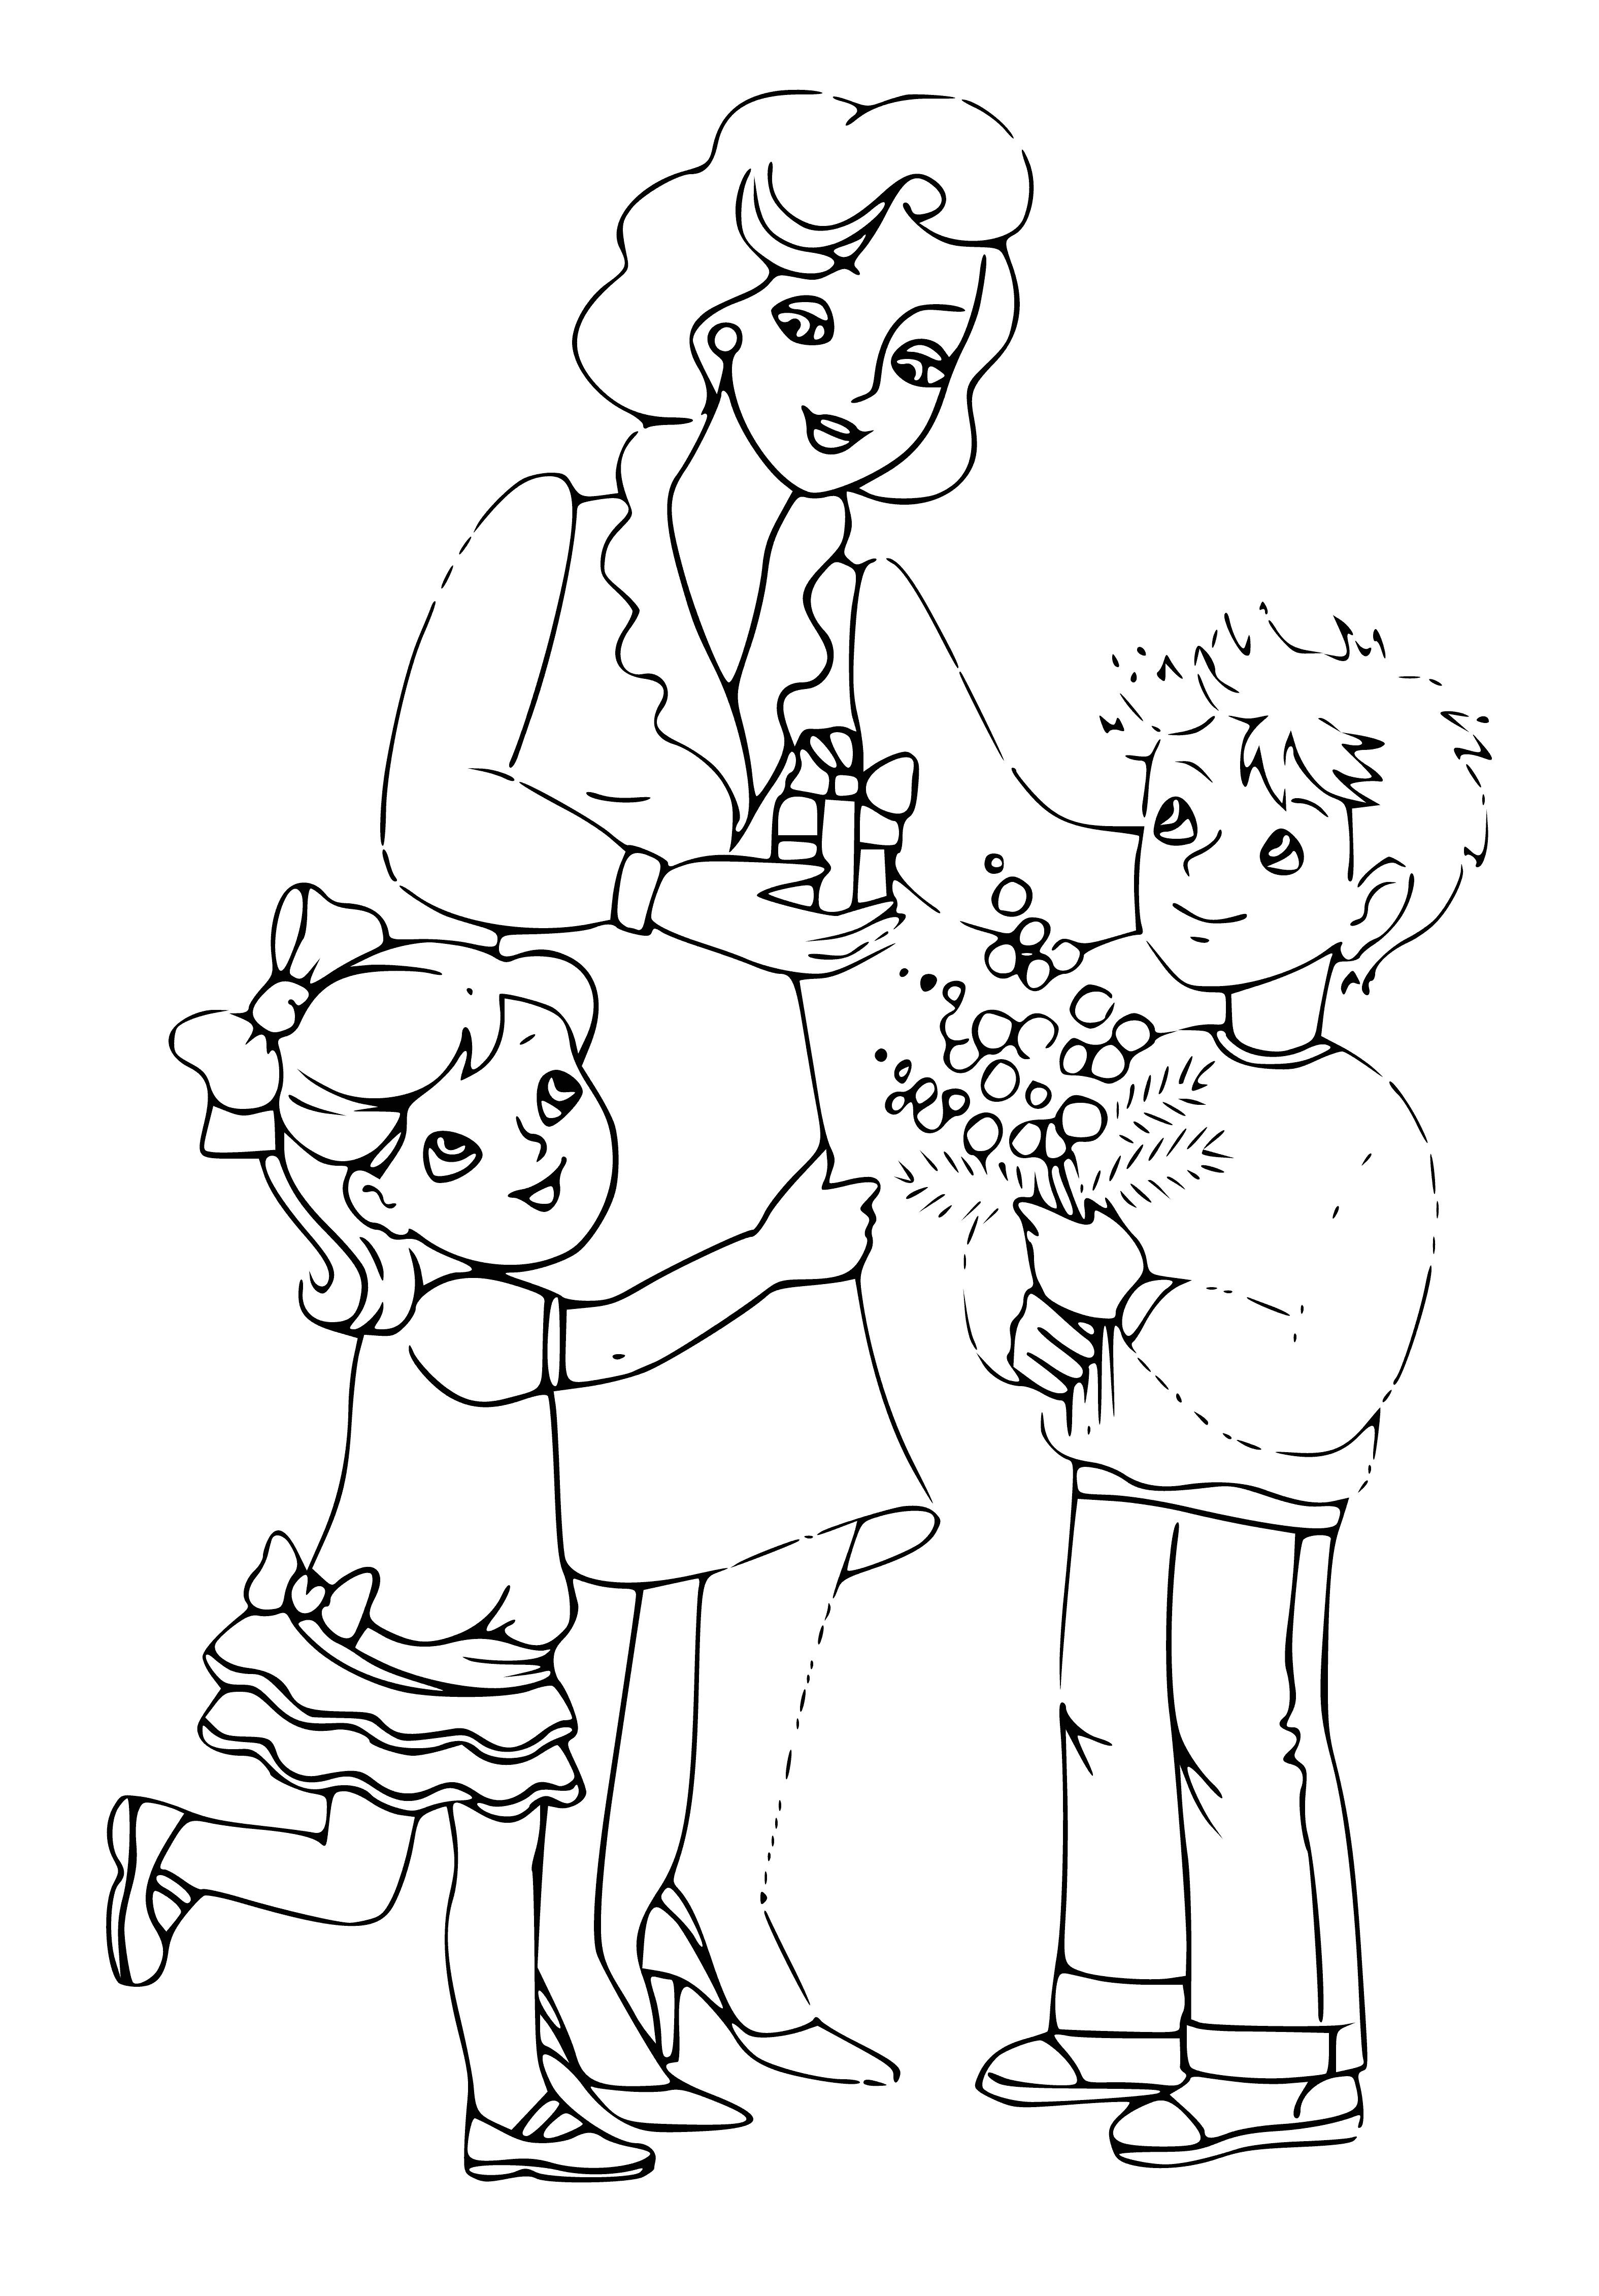 coloring page: Three coloring pages with a Spring theme: a girl in a field of flowers, a boy and a girl playing with a kite, and a boy and a girl riding a bike.